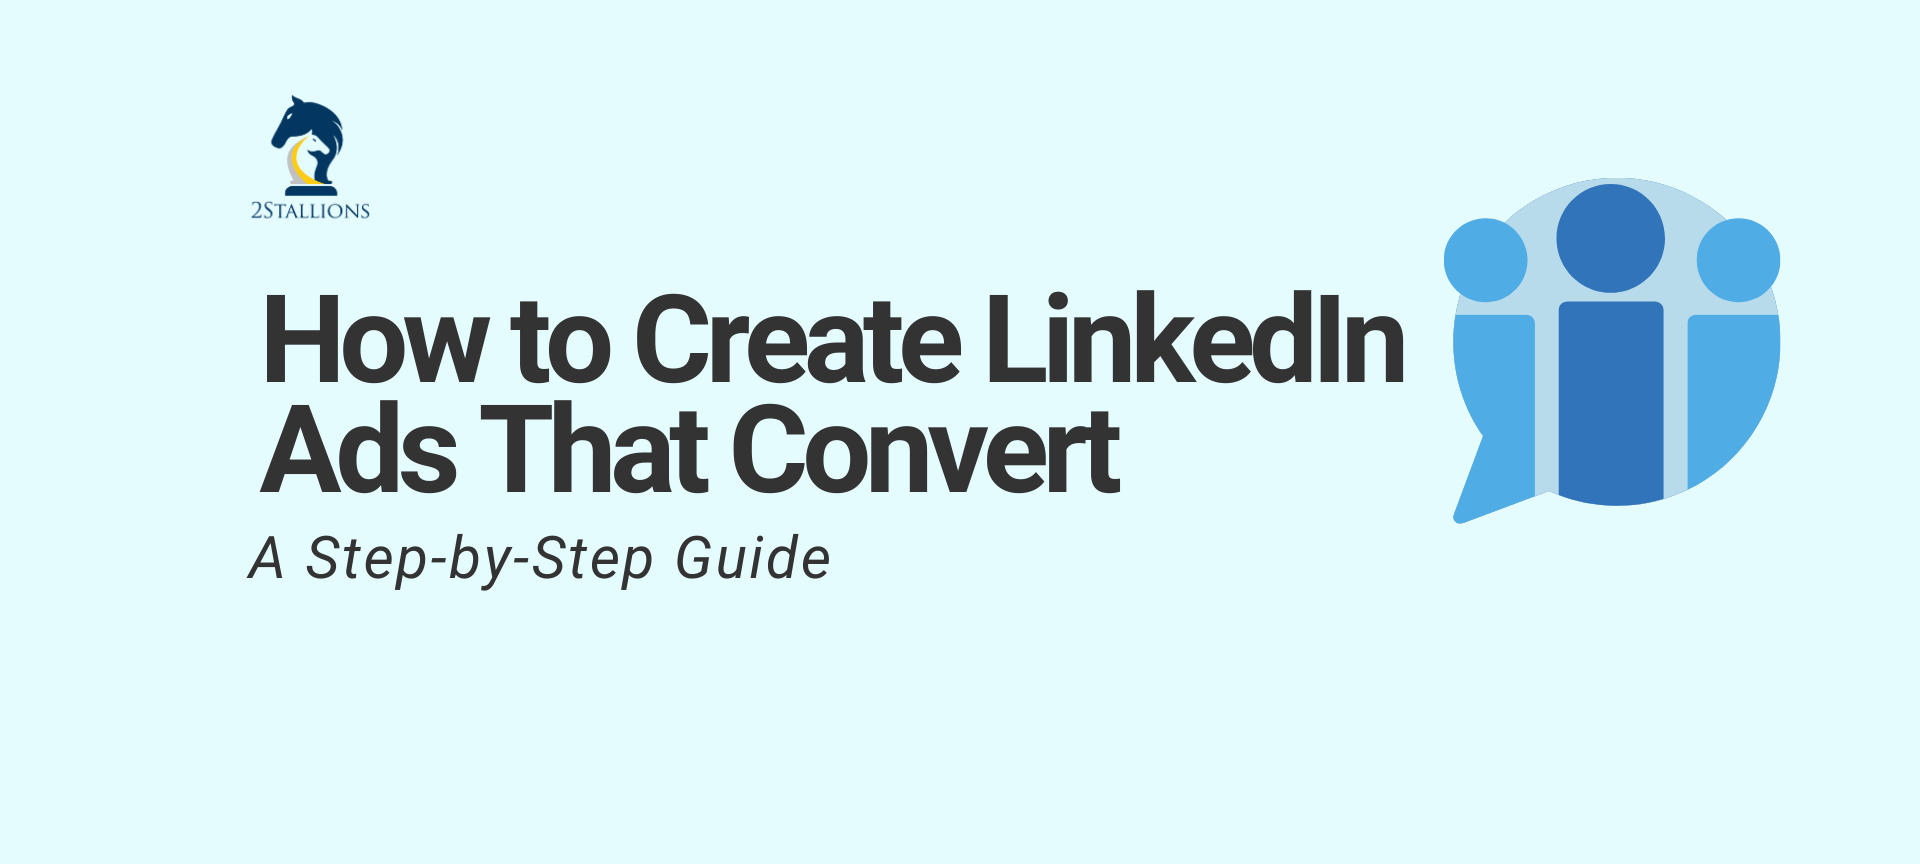 How to Create LinkedIn Ads That Convert: A Step-by-Step Guide